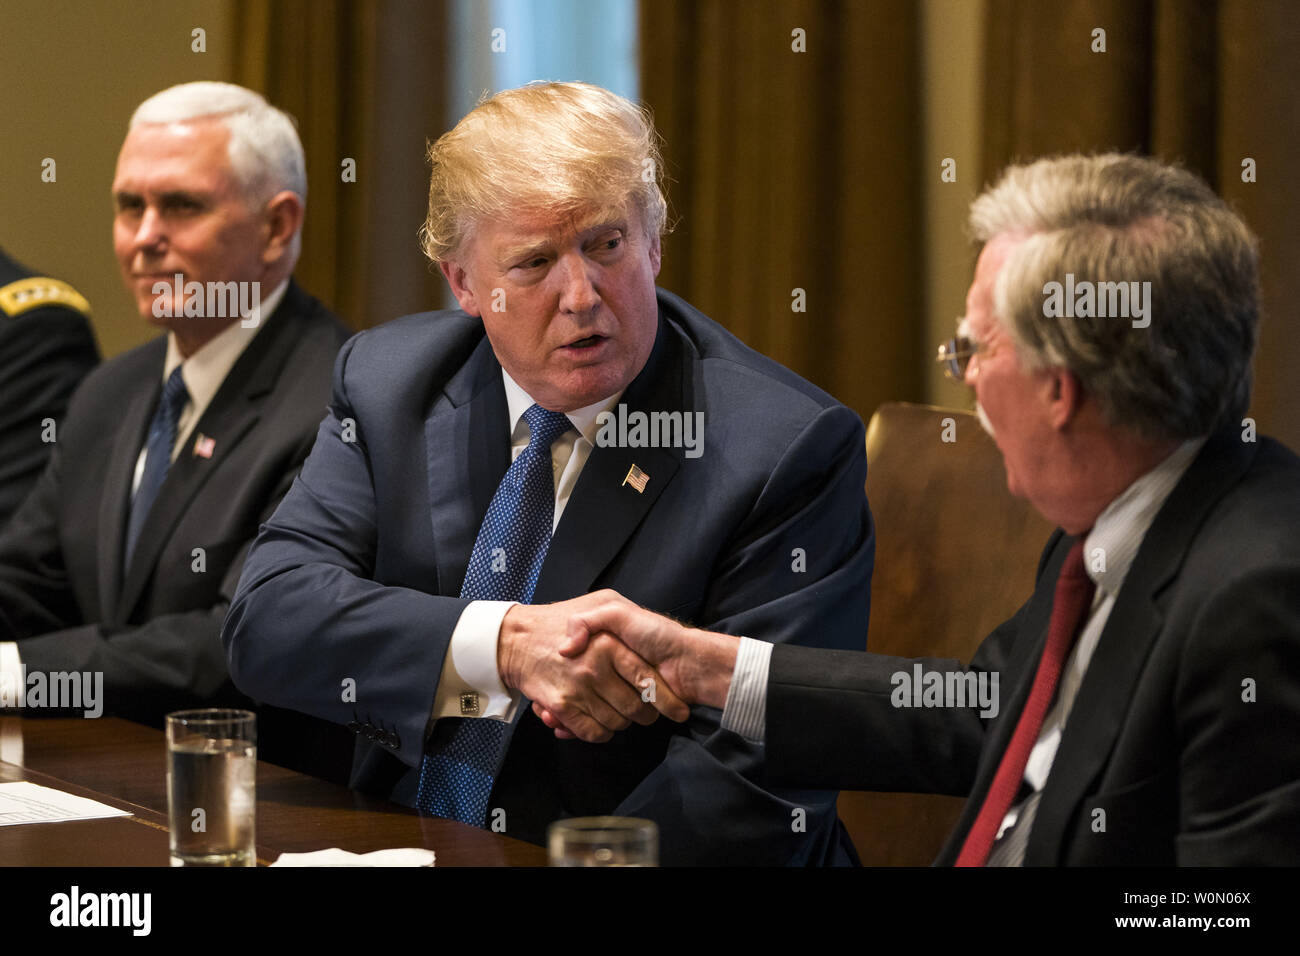 US President Donald J. Trump (L) shakes hands with his new National Security Advisor John Bolton (R) as he speaks with the media before a meeting with his military leadership in the Cabinet Room of the White House in Washington DC, on April 9, 2018. Trump said he will decide in the next few days whether the US will respond militarily for the reported chemical weapons attack in Syria. Trump also spoke about the FBI raid of his personal attorney Michael Cohen's office.      Photo by Jim Lo Scalzo/UPI Stock Photo